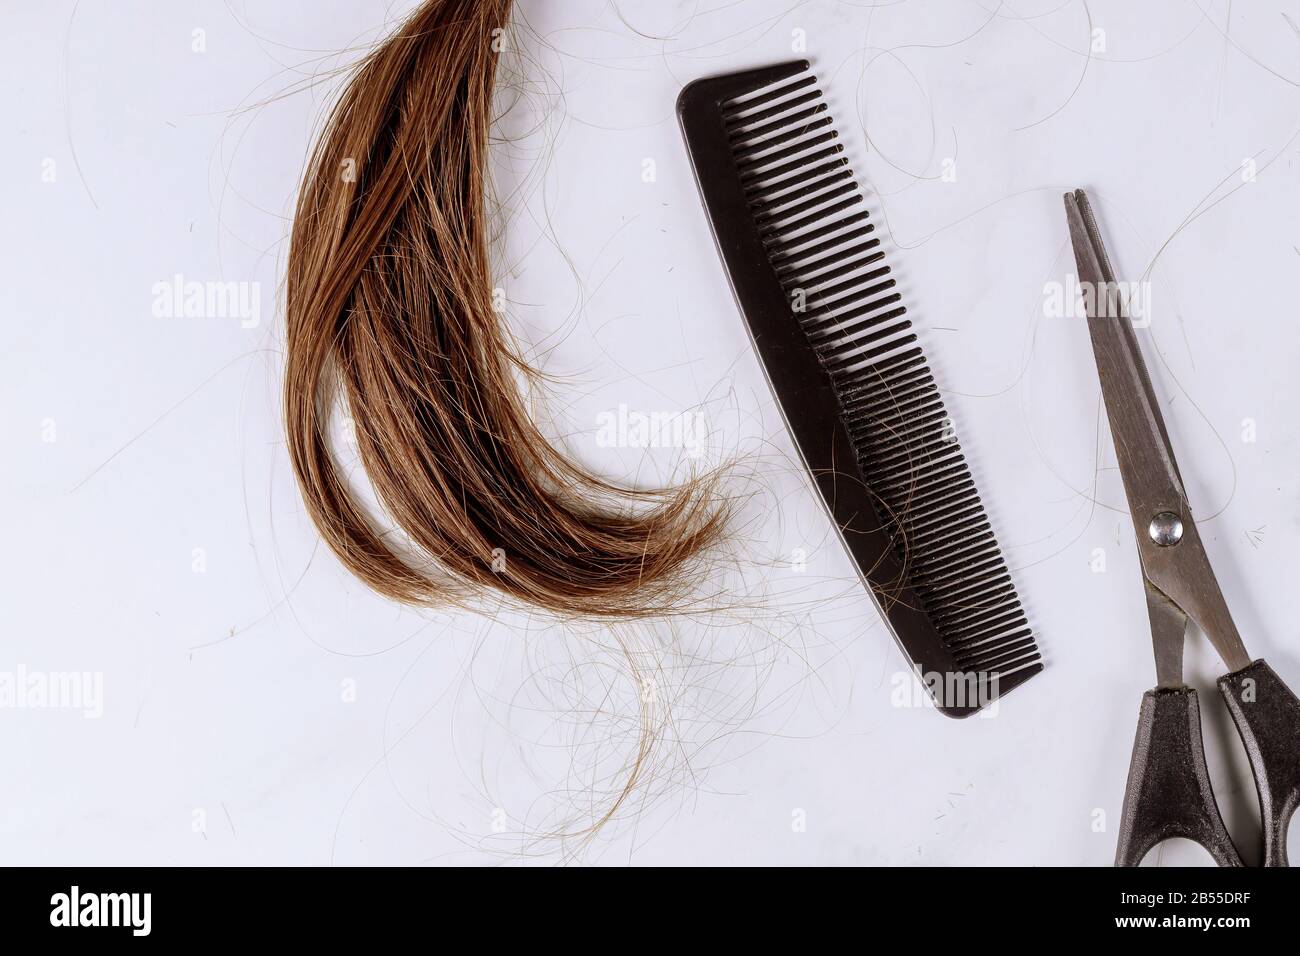 Cropped view a ponytail cutting hair for donation, scissors and comb Stock Photo